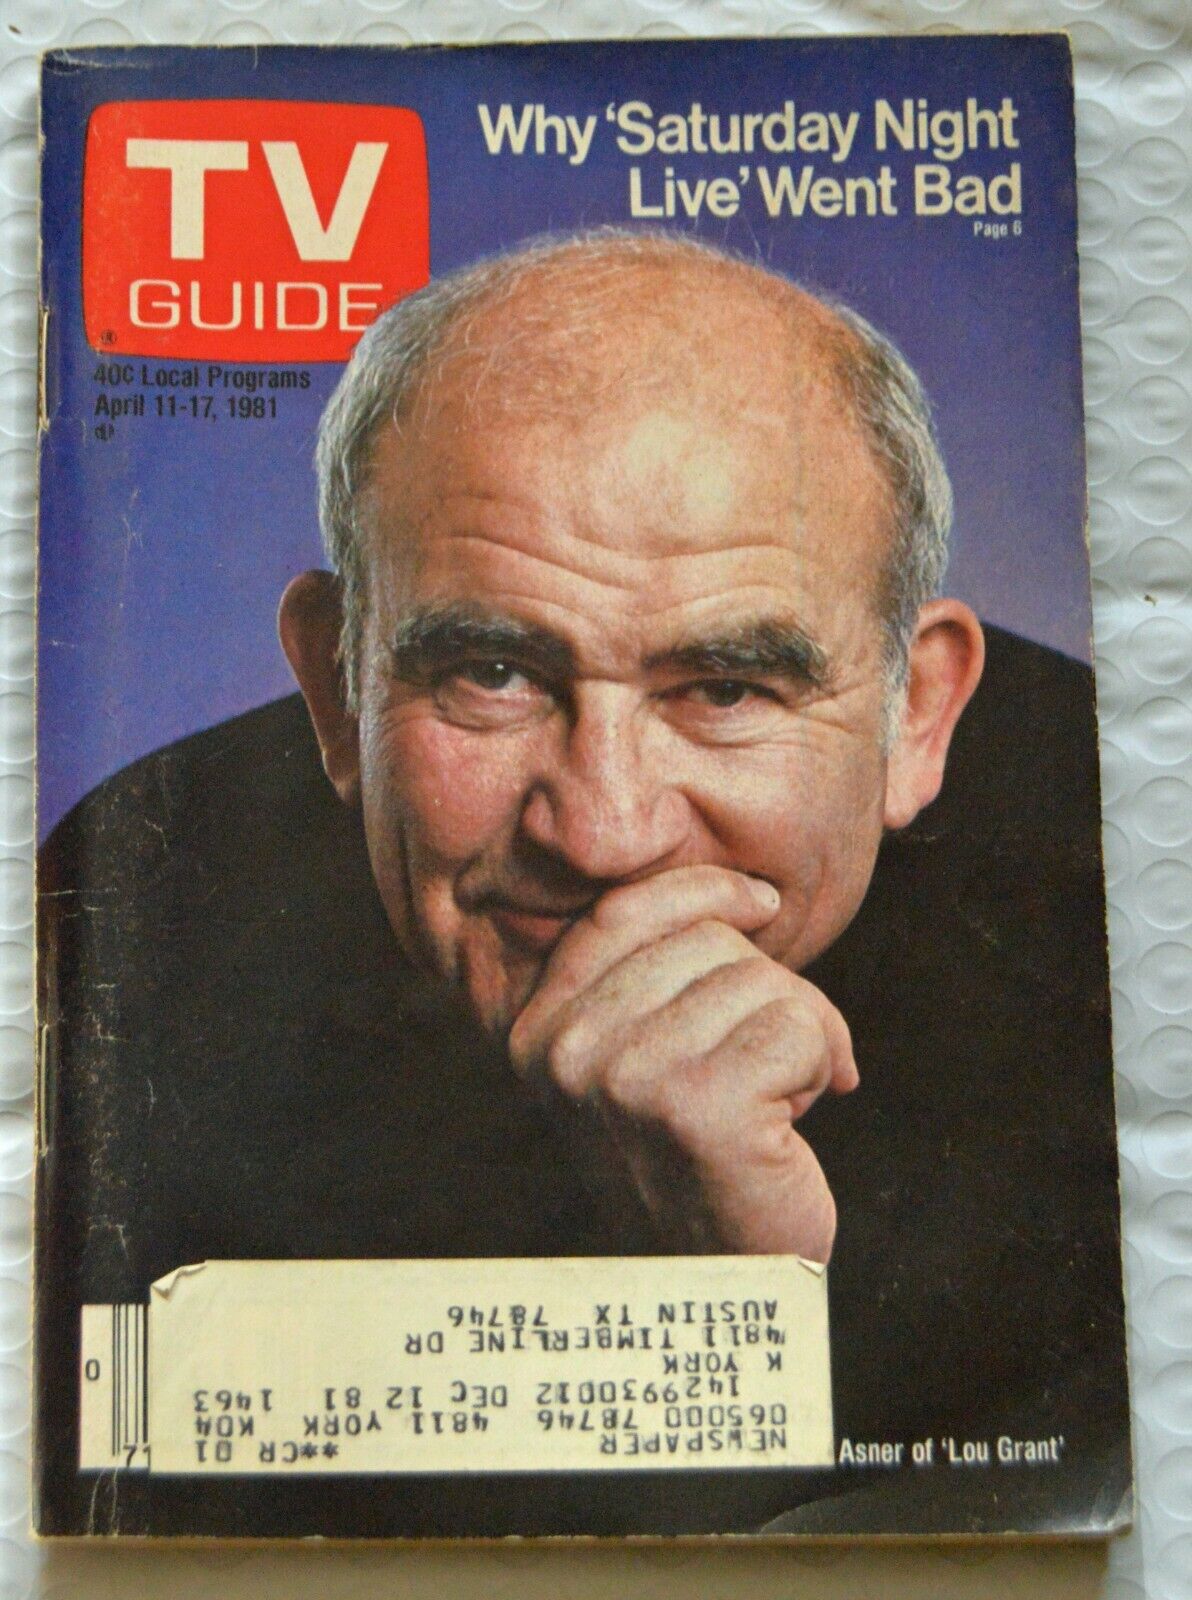 ED ASNER of \'LOU GRANT\' - 1981 SOUTH TEXAS TV Guide - EXCELLENT